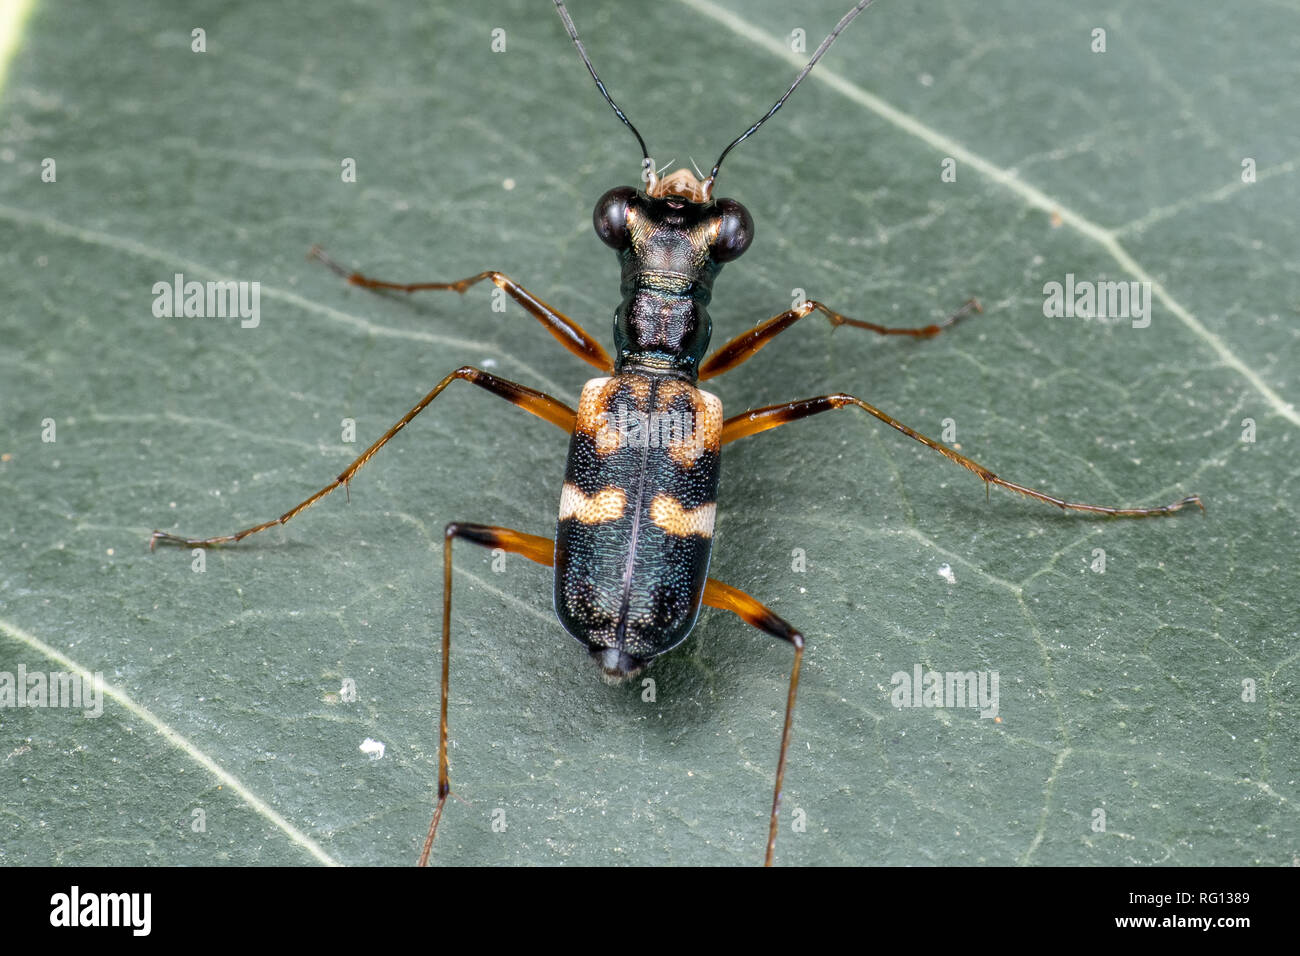 Tree trunk tiger beetle, Distipsidera sp, on a leaf in tropical rainforest, Queensland, Australia Stock Photo